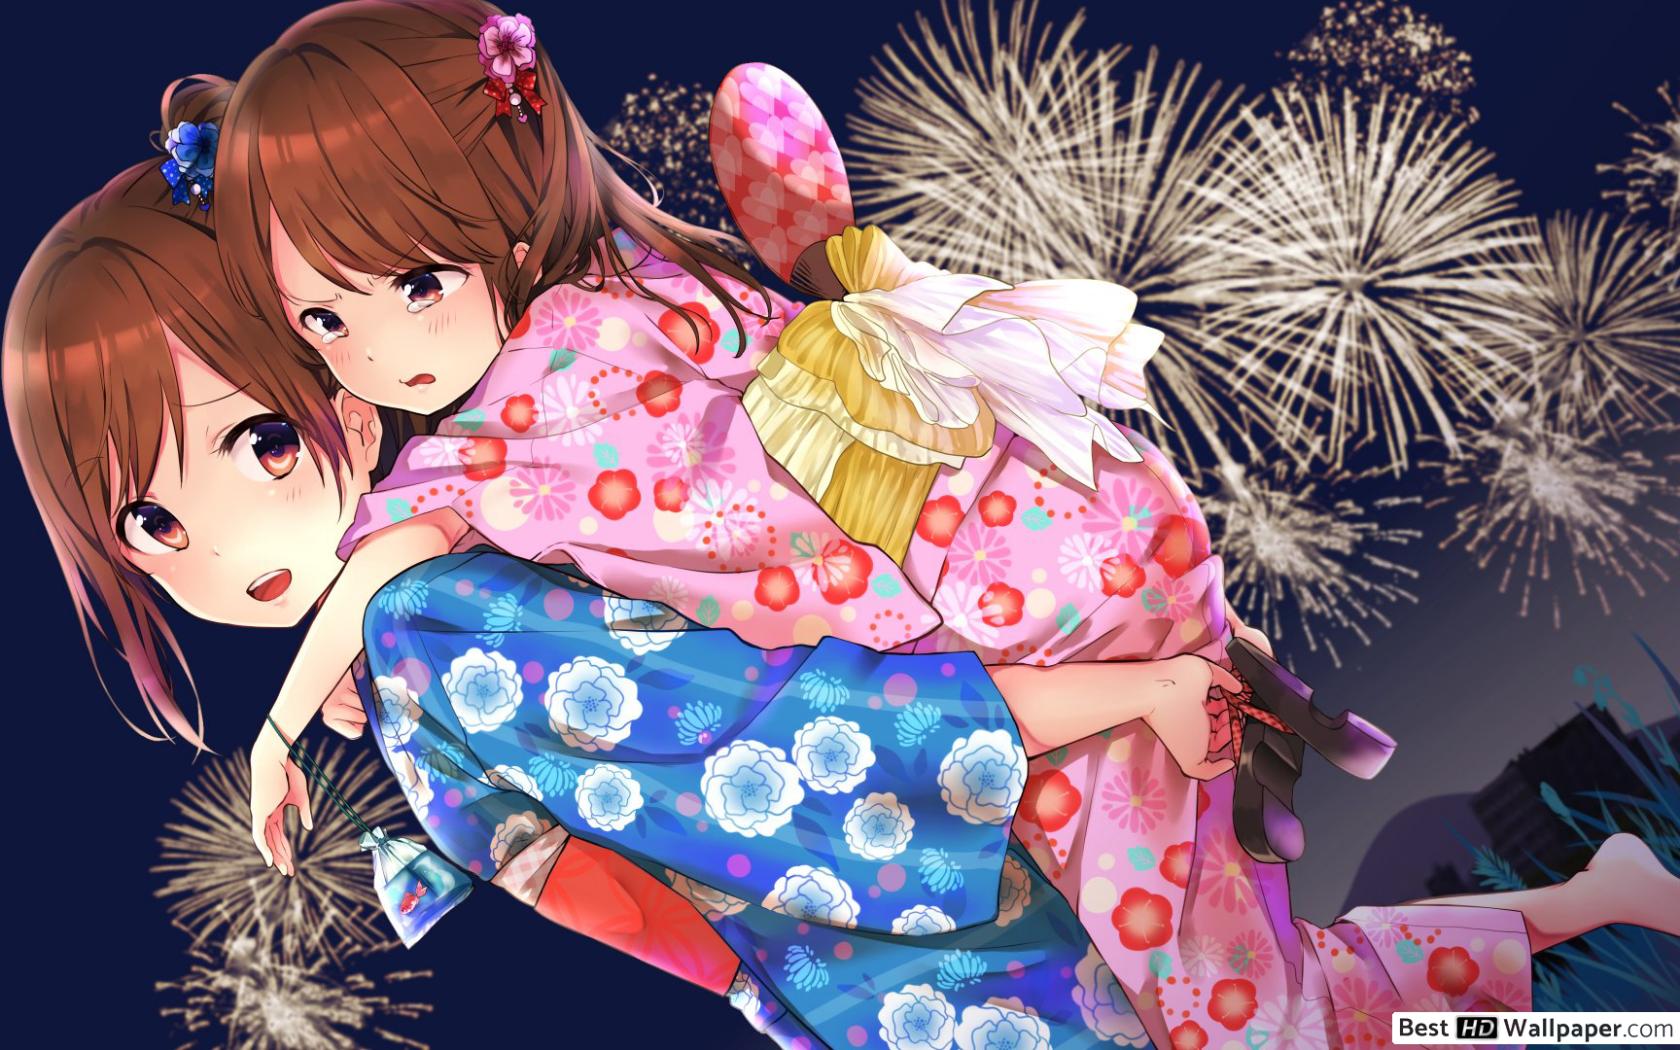 Anime girls scared of fireworks HD wallpaper download